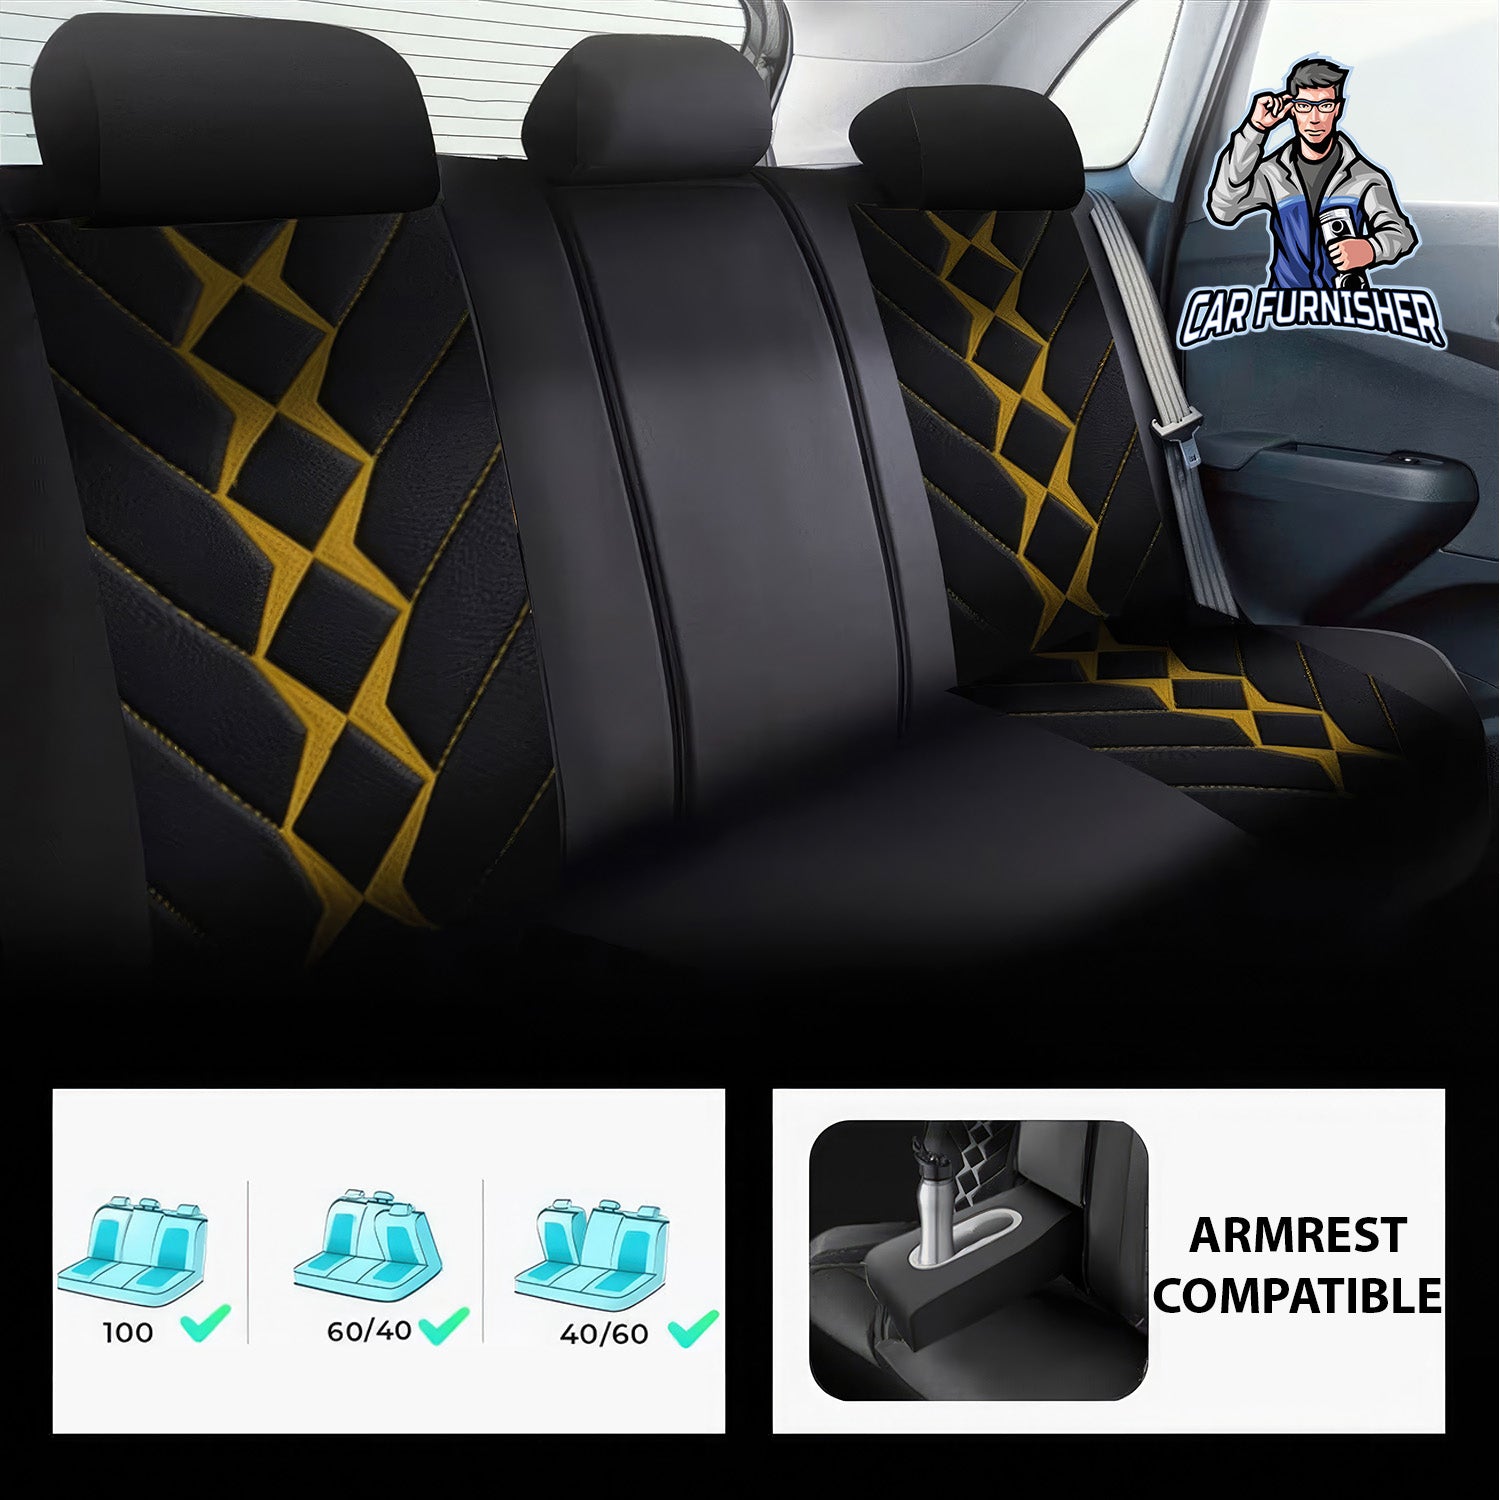 Car Seat Cover Set - Texas Design Yellow 5 Seats + Headrests (Full Set) Full Leather